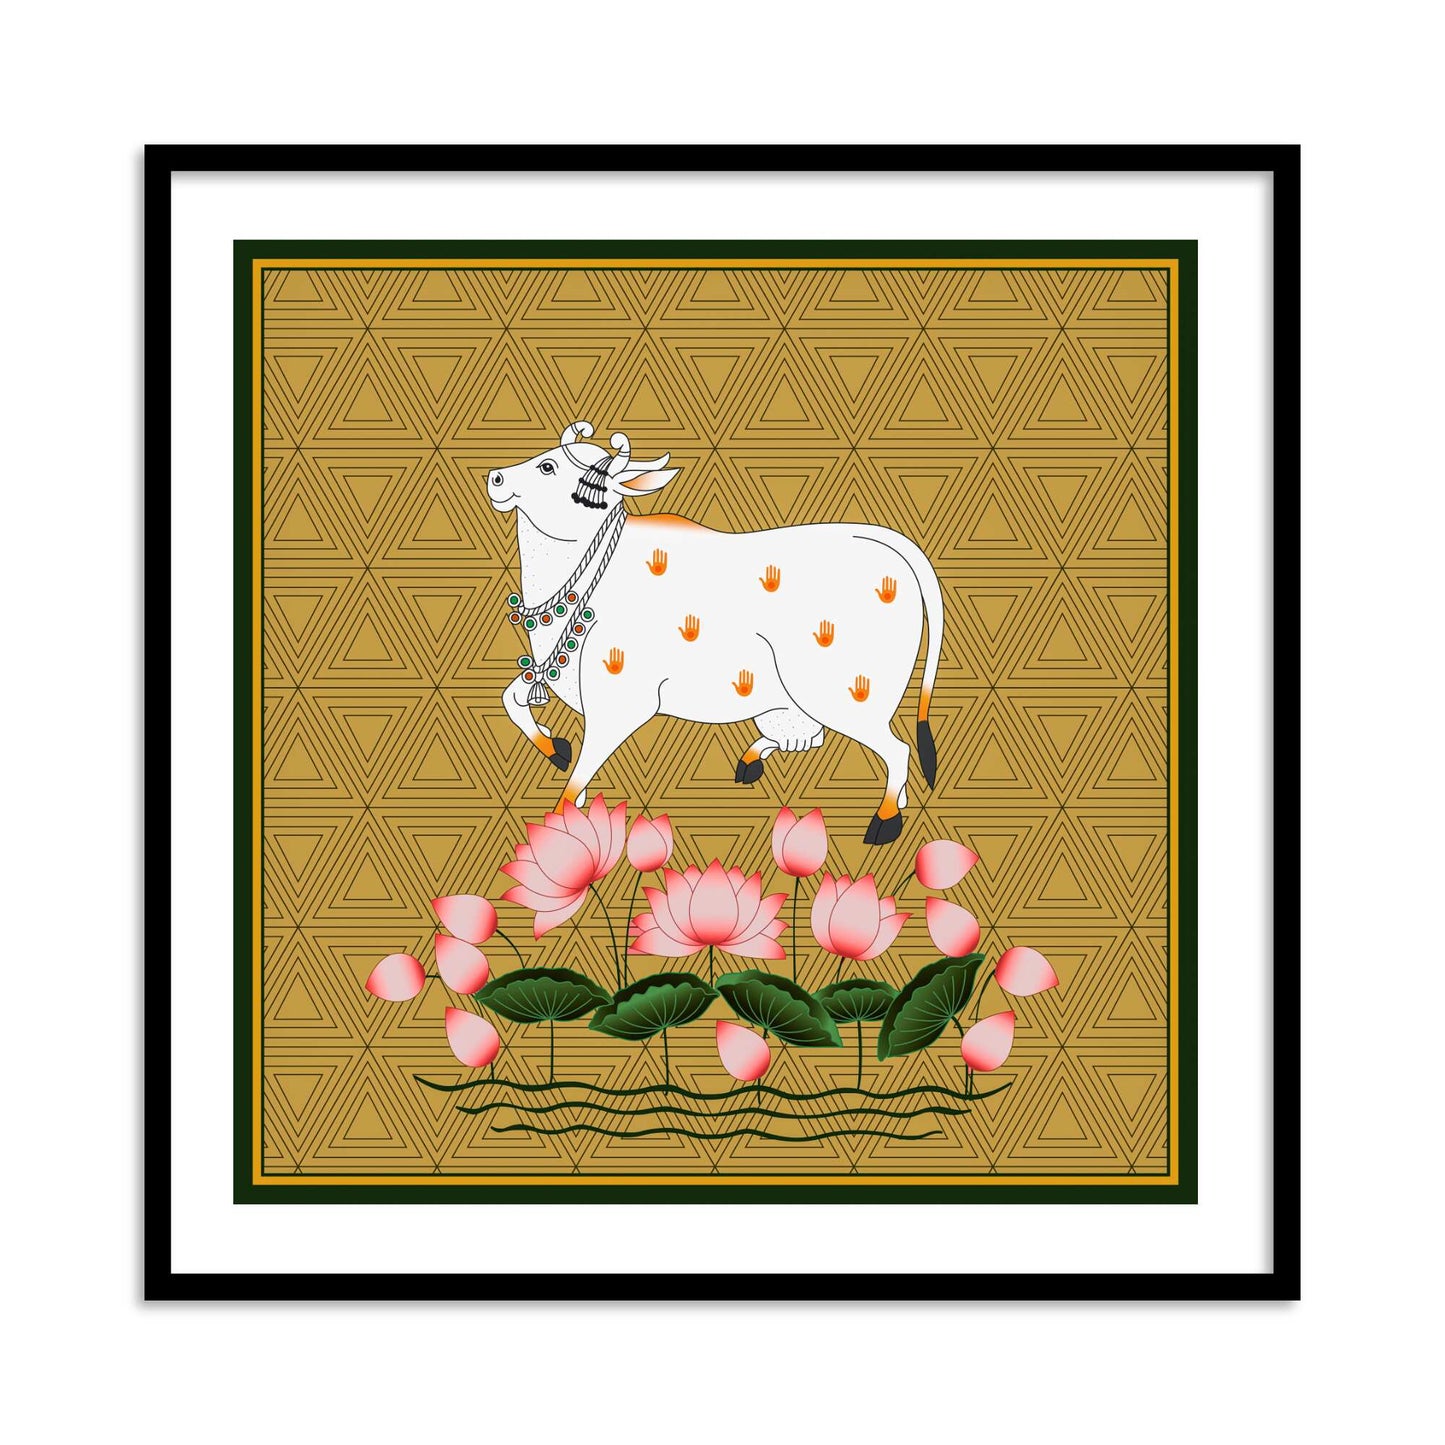 Living Room Shri Nath ji Devoted Cow Pichwai Traditional Painting | Indian Pichwai Painting Wall Art Home Decor